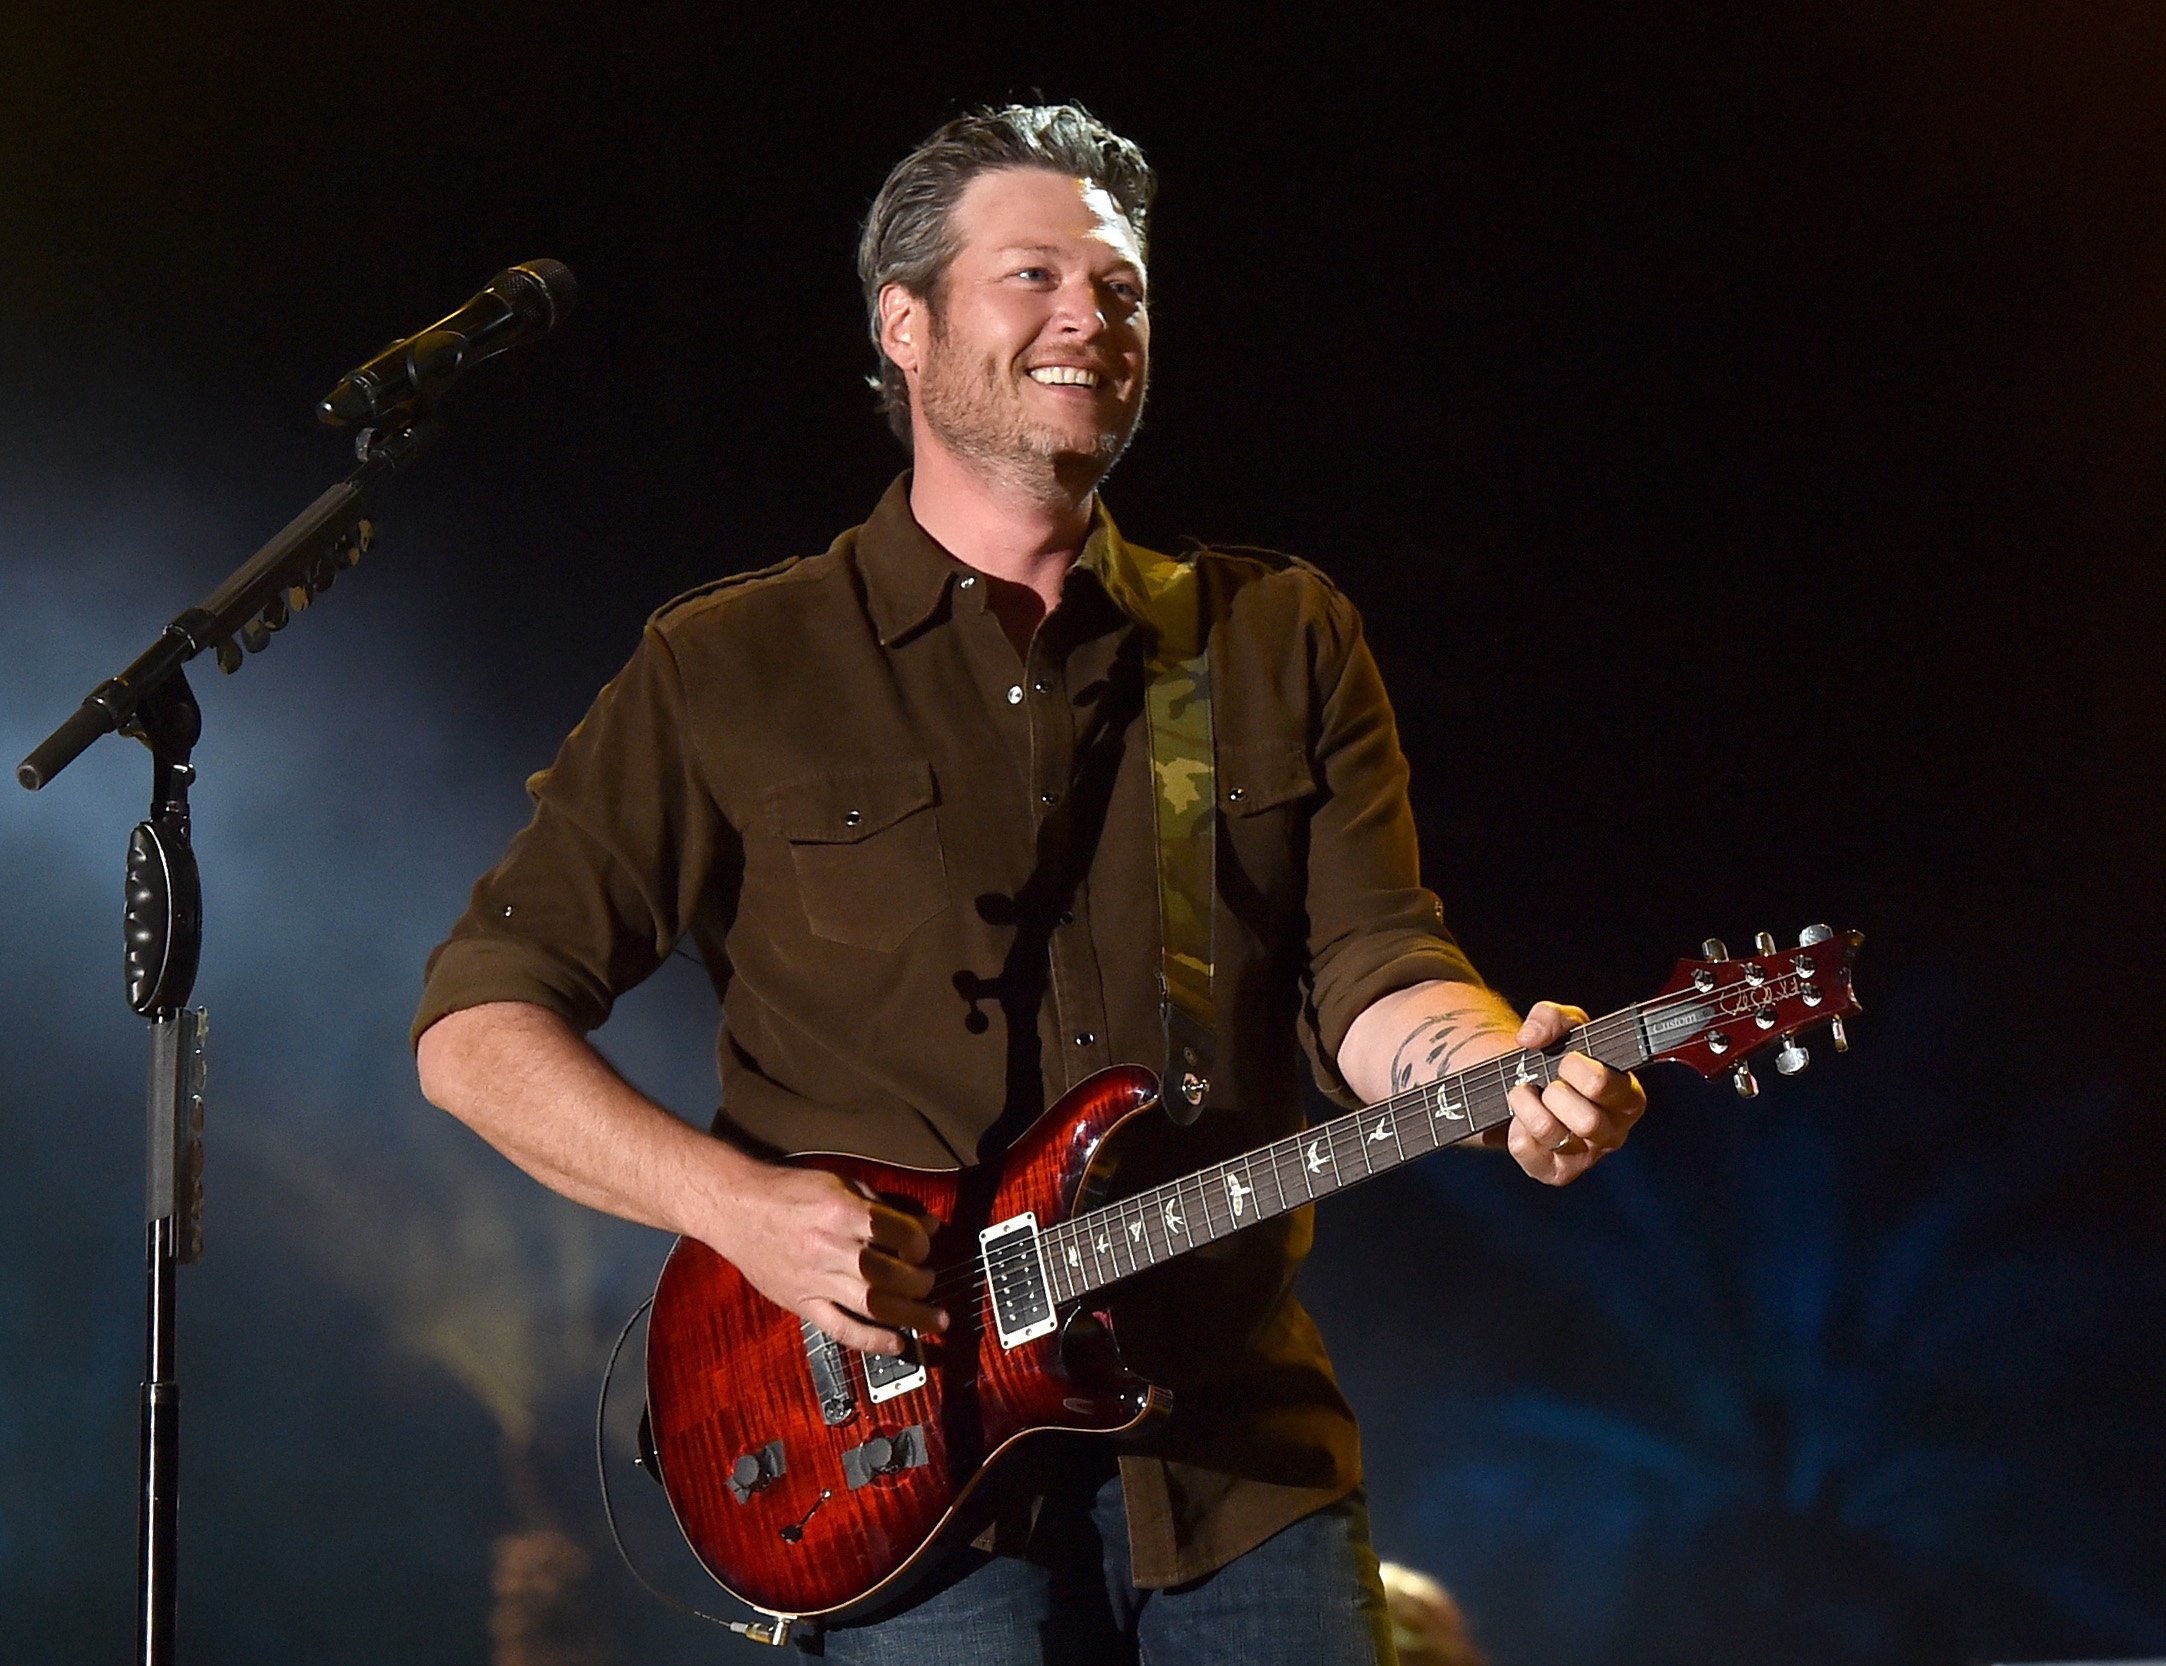 Blake Shelton performing in Indio, California in 2015. | Source: Getty Images